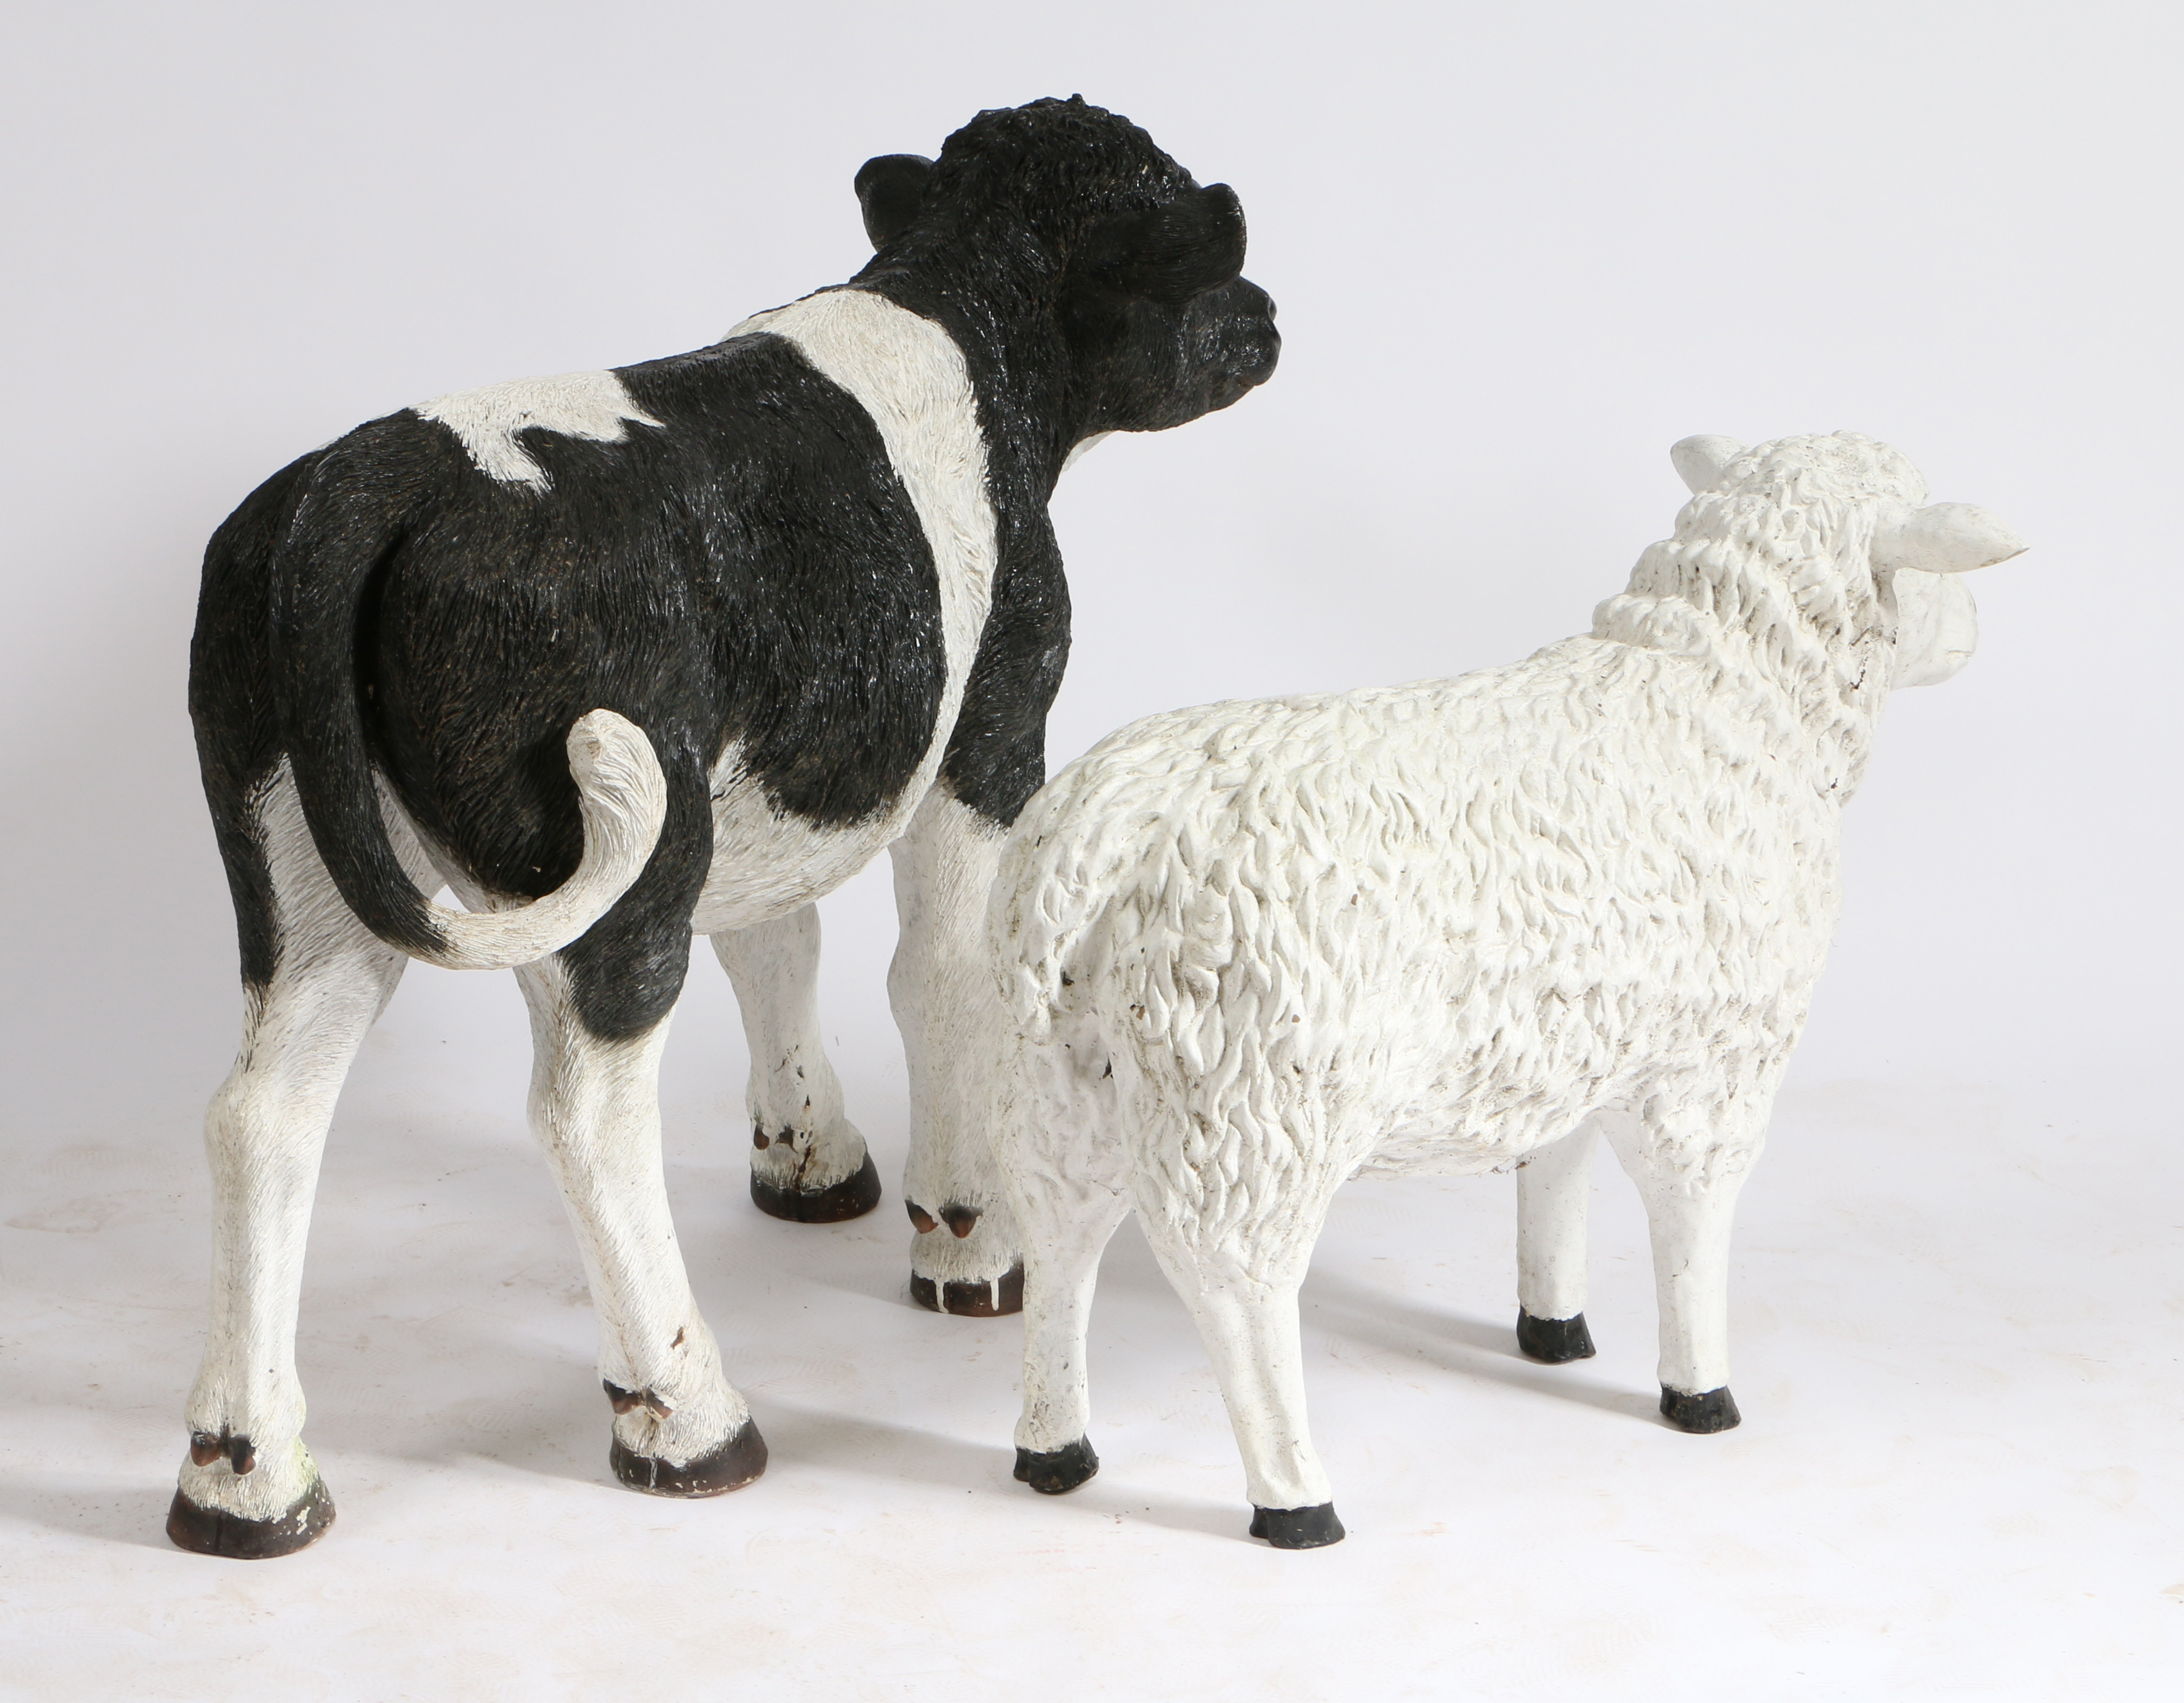 A LIFE SIZE RESIN CALF GARDEN ORNAMENT TOGETHER WITH A LAMB. - Image 2 of 2